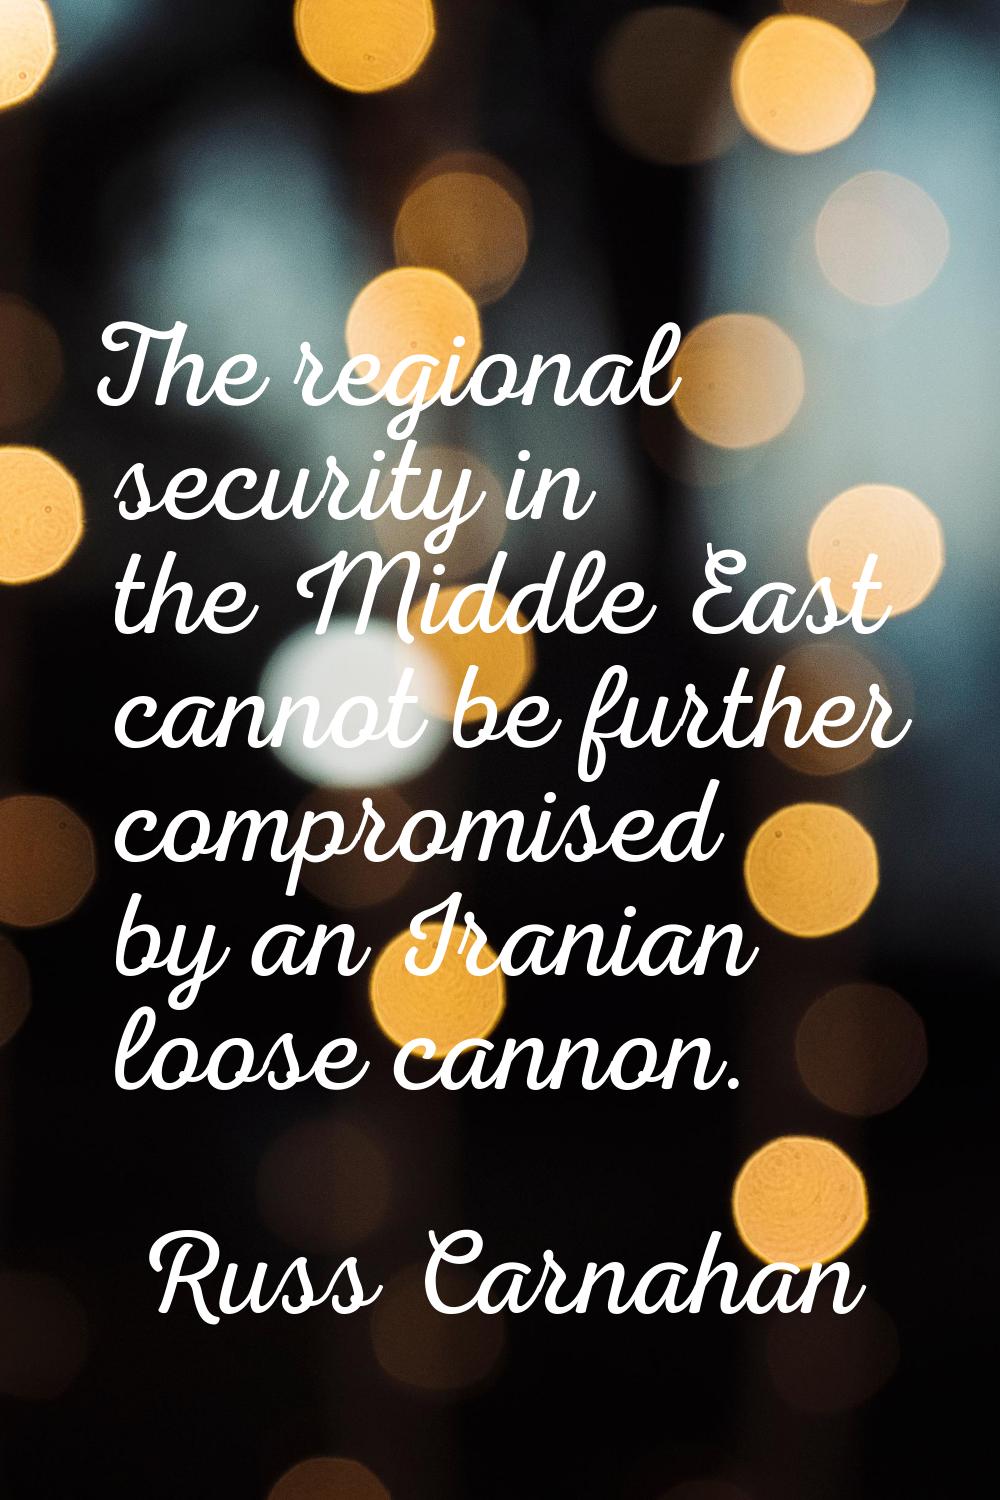 The regional security in the Middle East cannot be further compromised by an Iranian loose cannon.